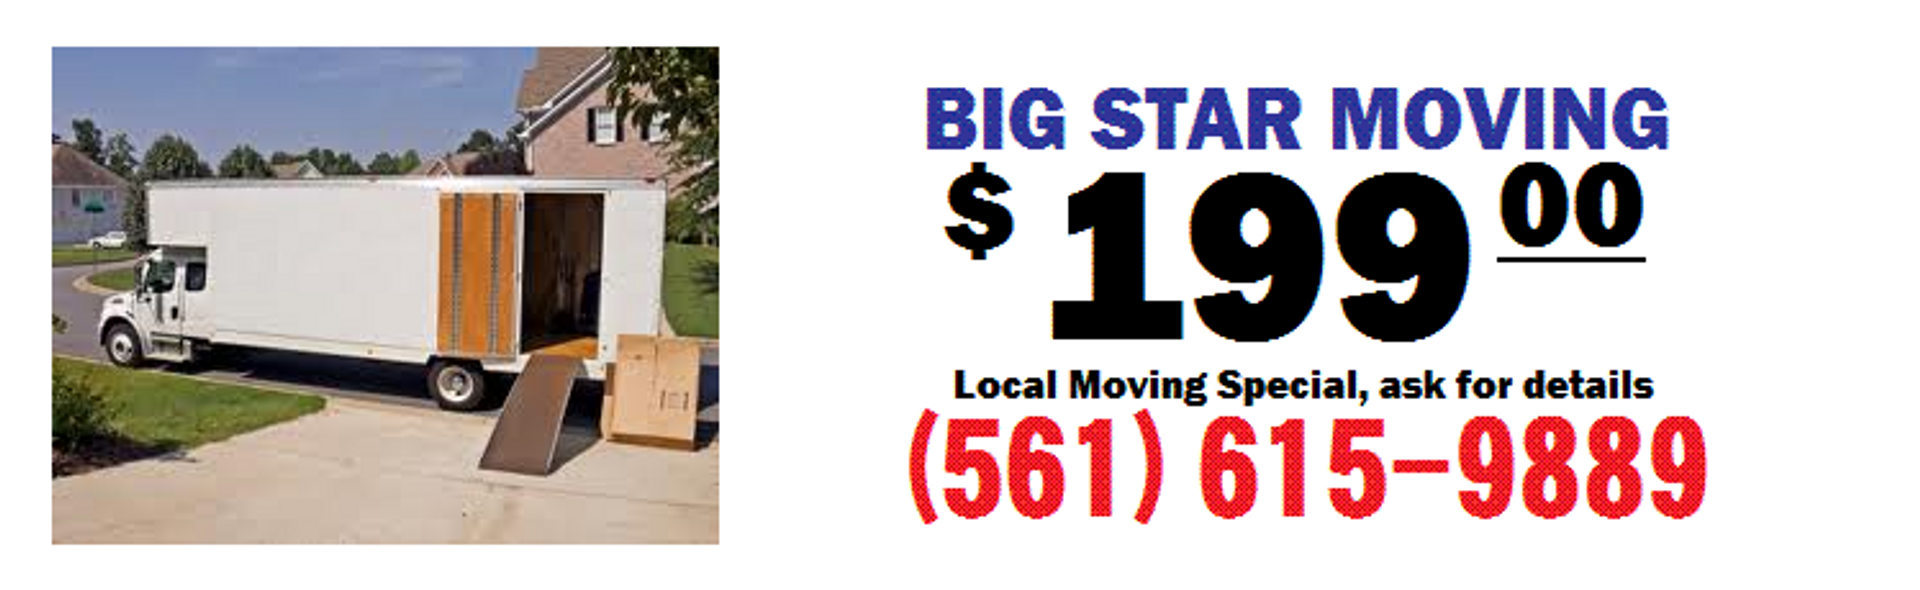 Big Star Moving and Delivery from $99 - We Buy, Sell, Move & Deliver cheap furniture's locally!